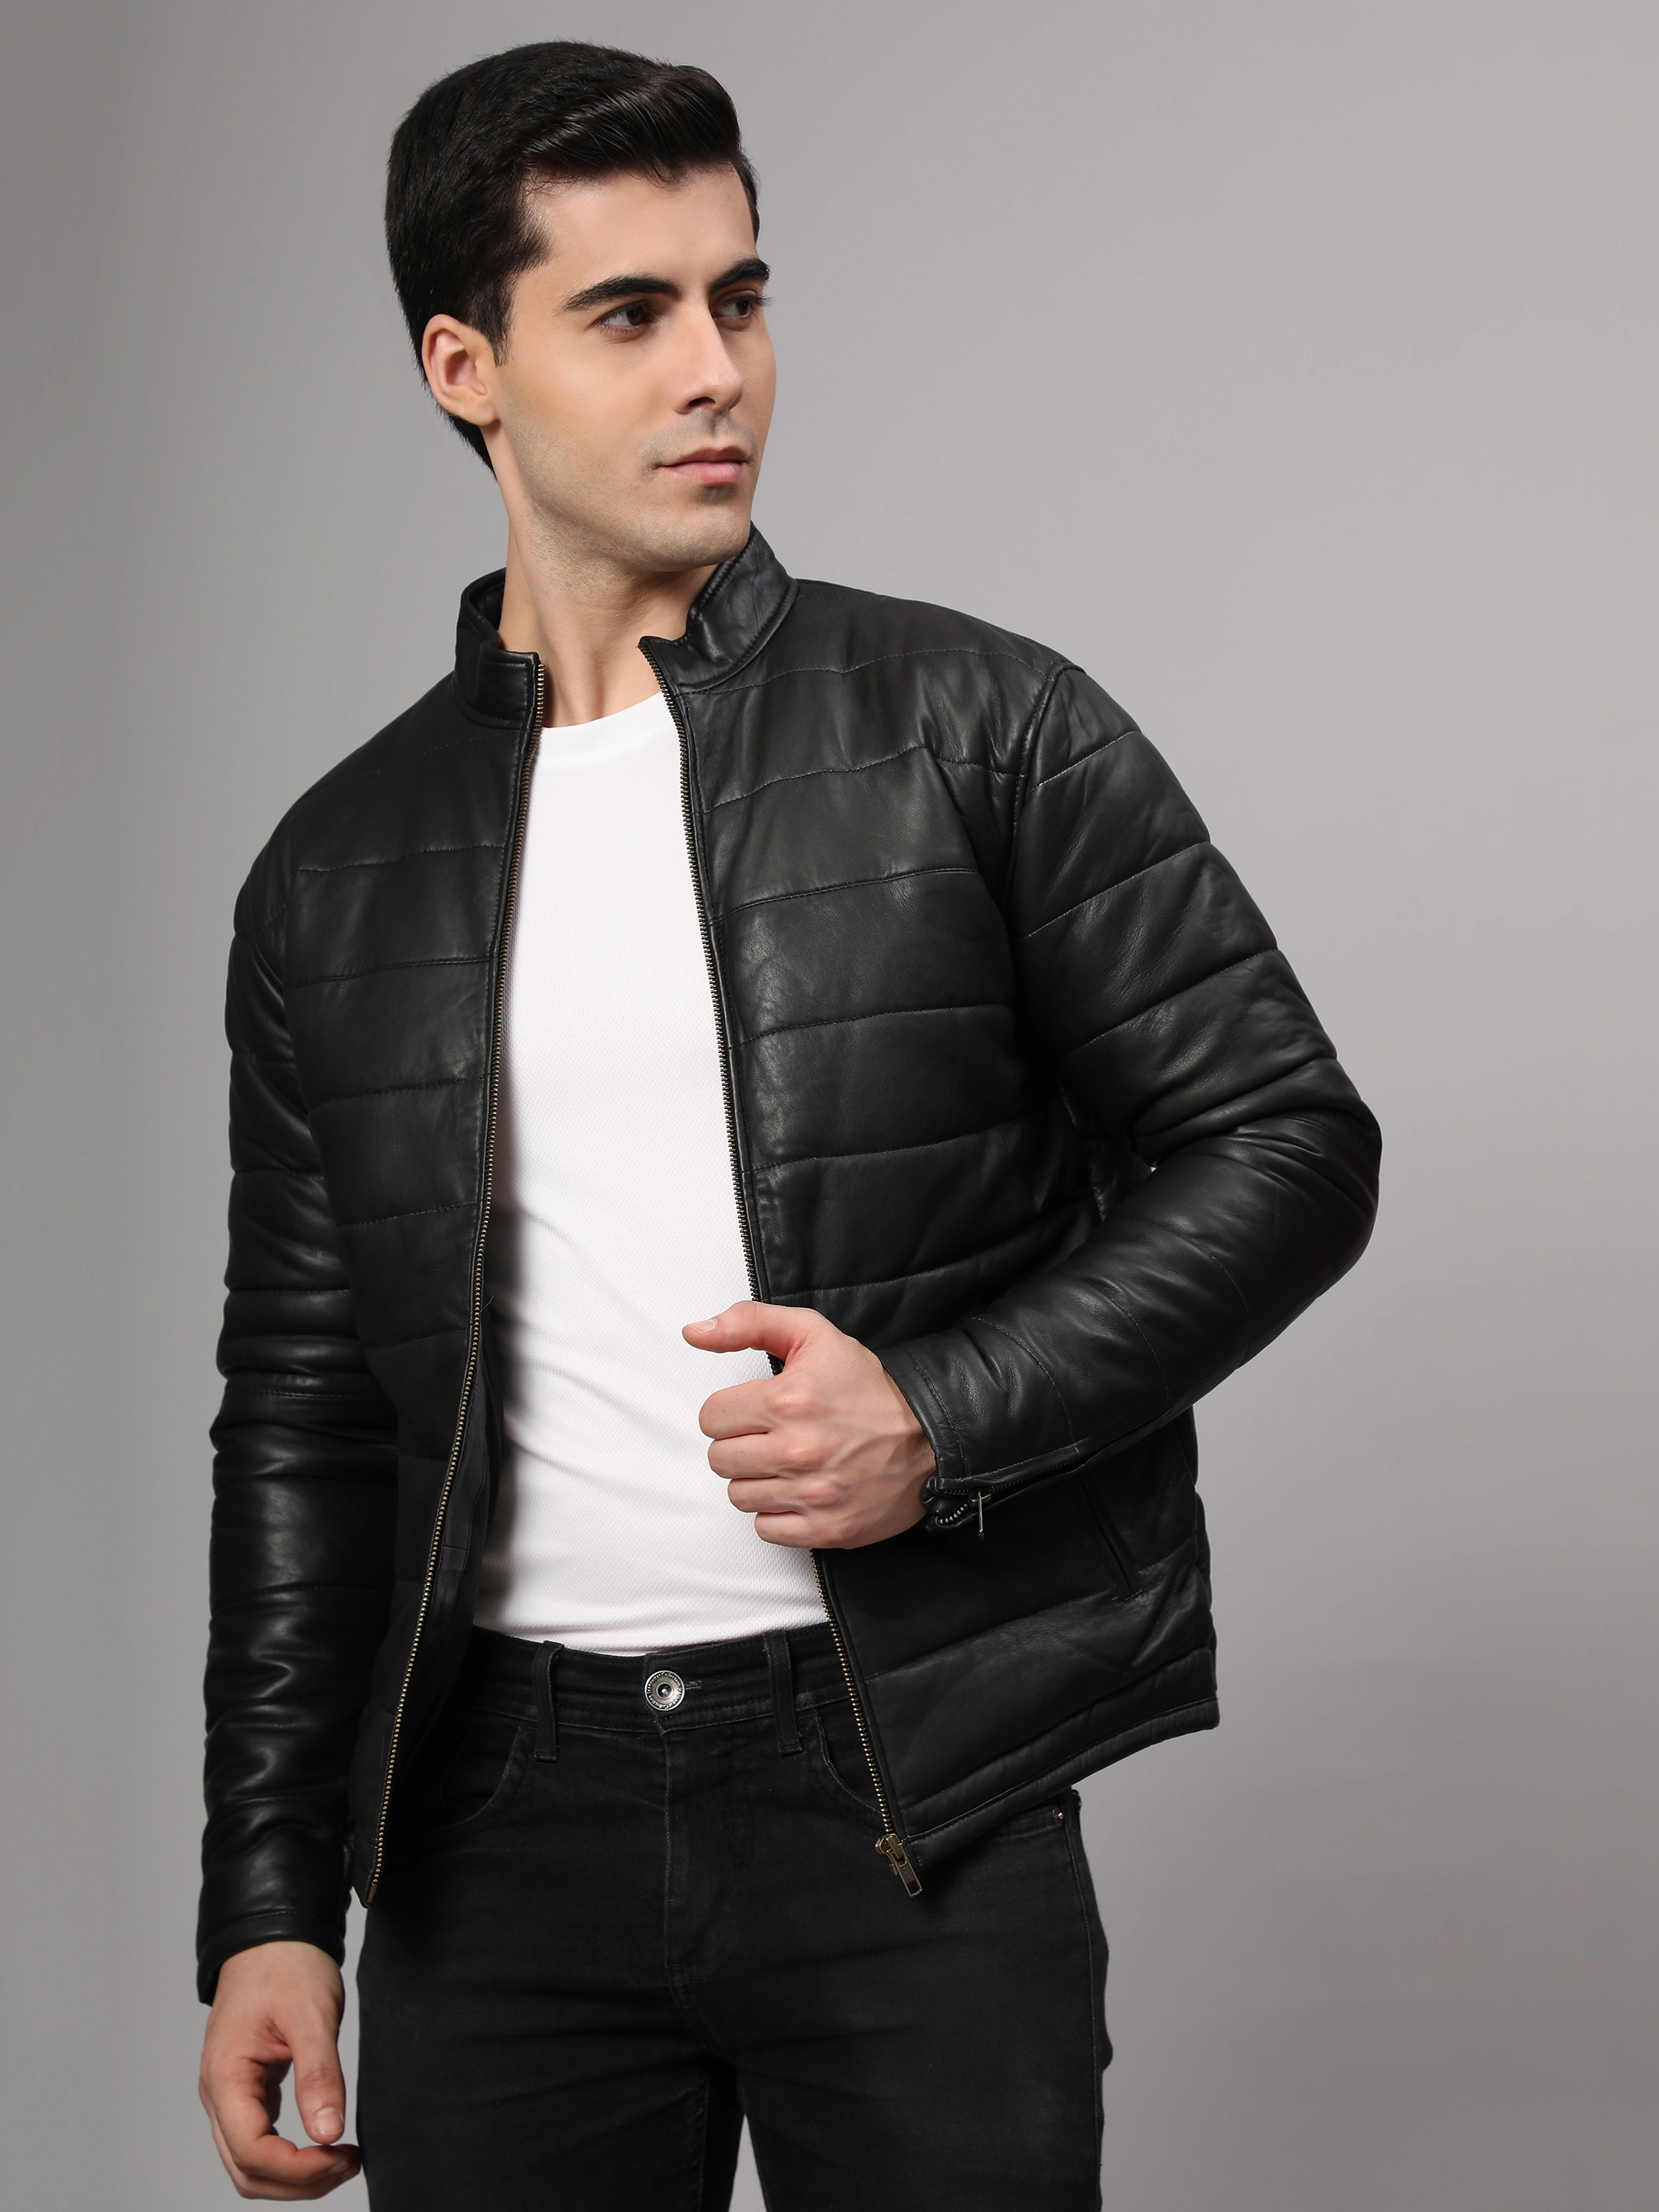 Quilted Bomber Jacket || Charmshilp🏇🏇-S-2